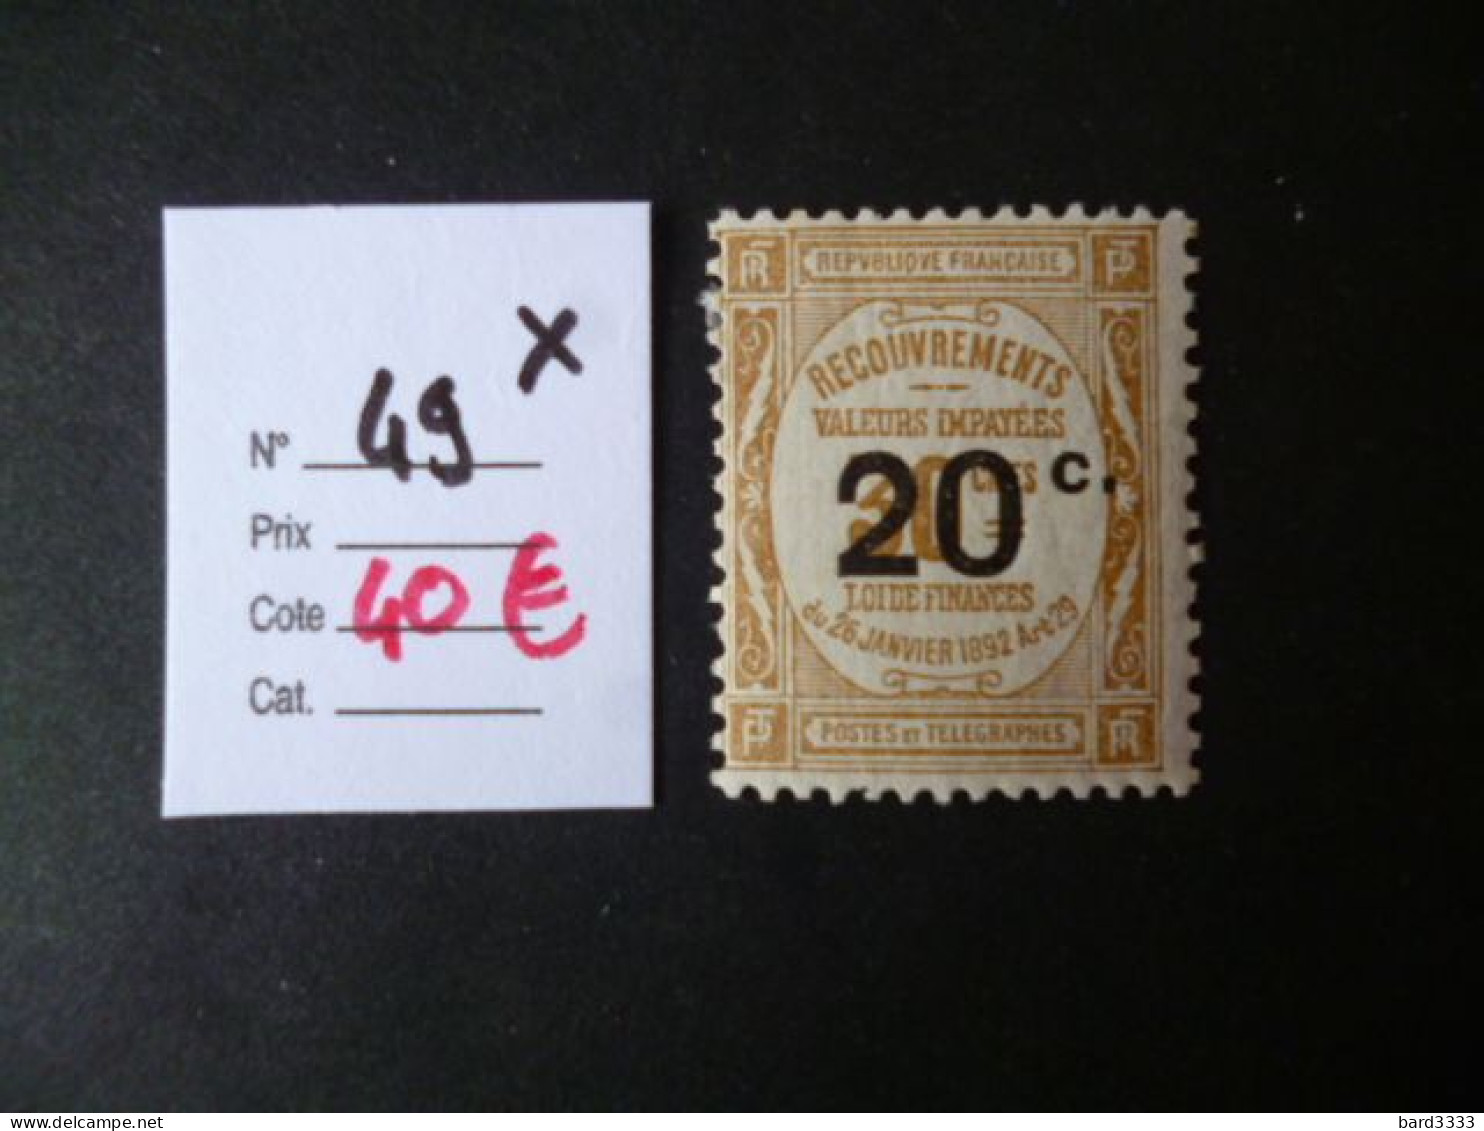 Timbre France Neuf * Taxe N° 49 Cote 40 € - 1859-1959 Nuevos